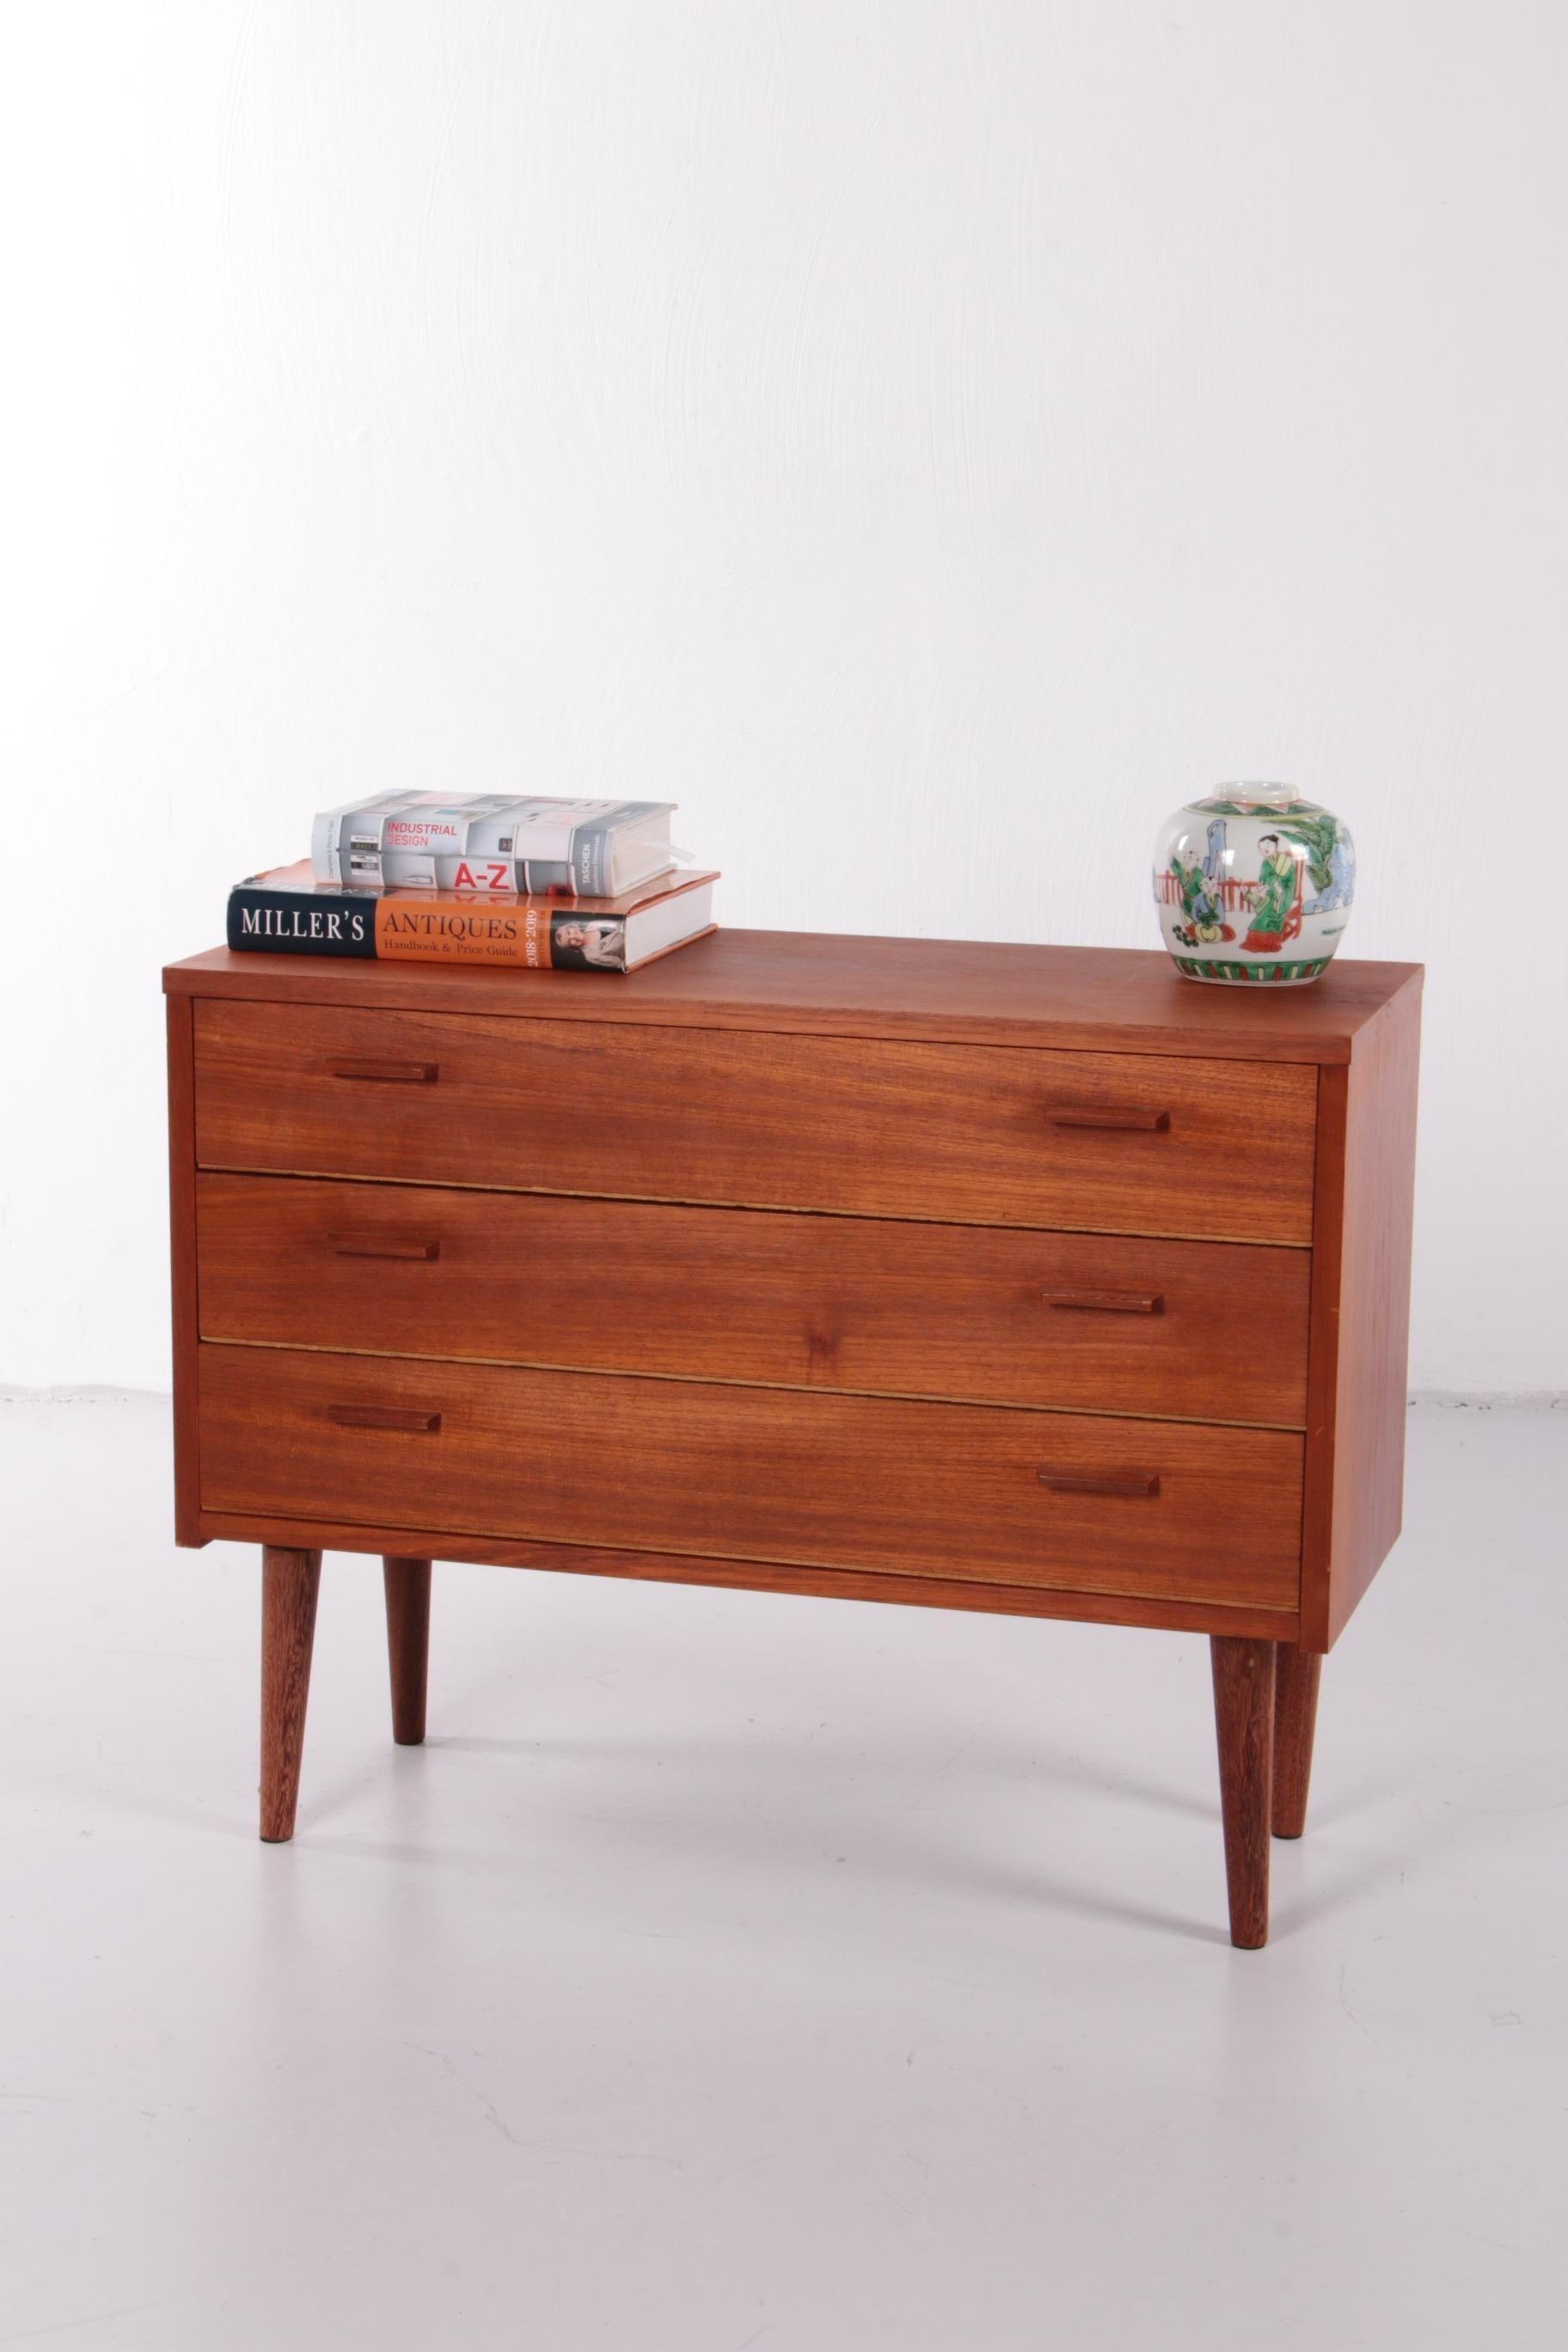 A beautiful chest of drawers from Denmark. The cabinet was probably produced around the 1960s and is made of veneered teak, which gives the cabinet a nice warm color.

This cabinet has three drawers for quick storage of all your belongings. The